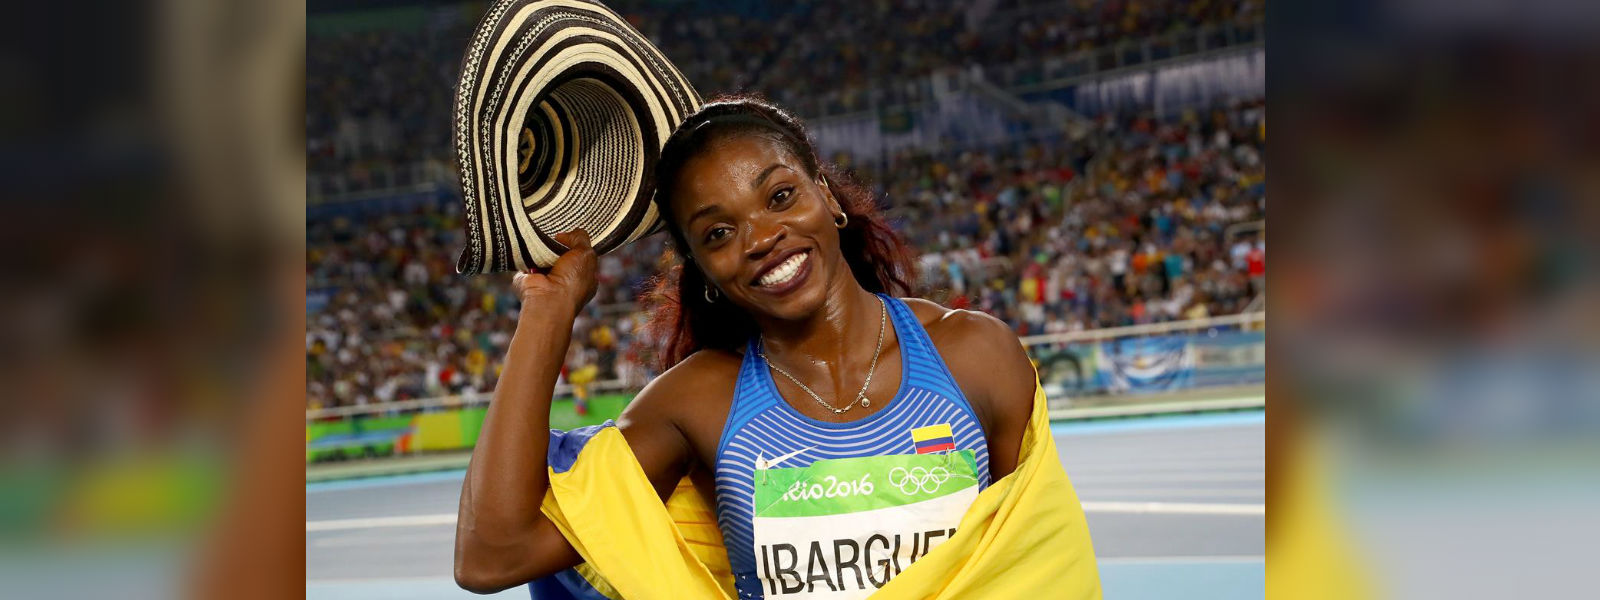 Colombian athlete Caterine Ibarguen named best 